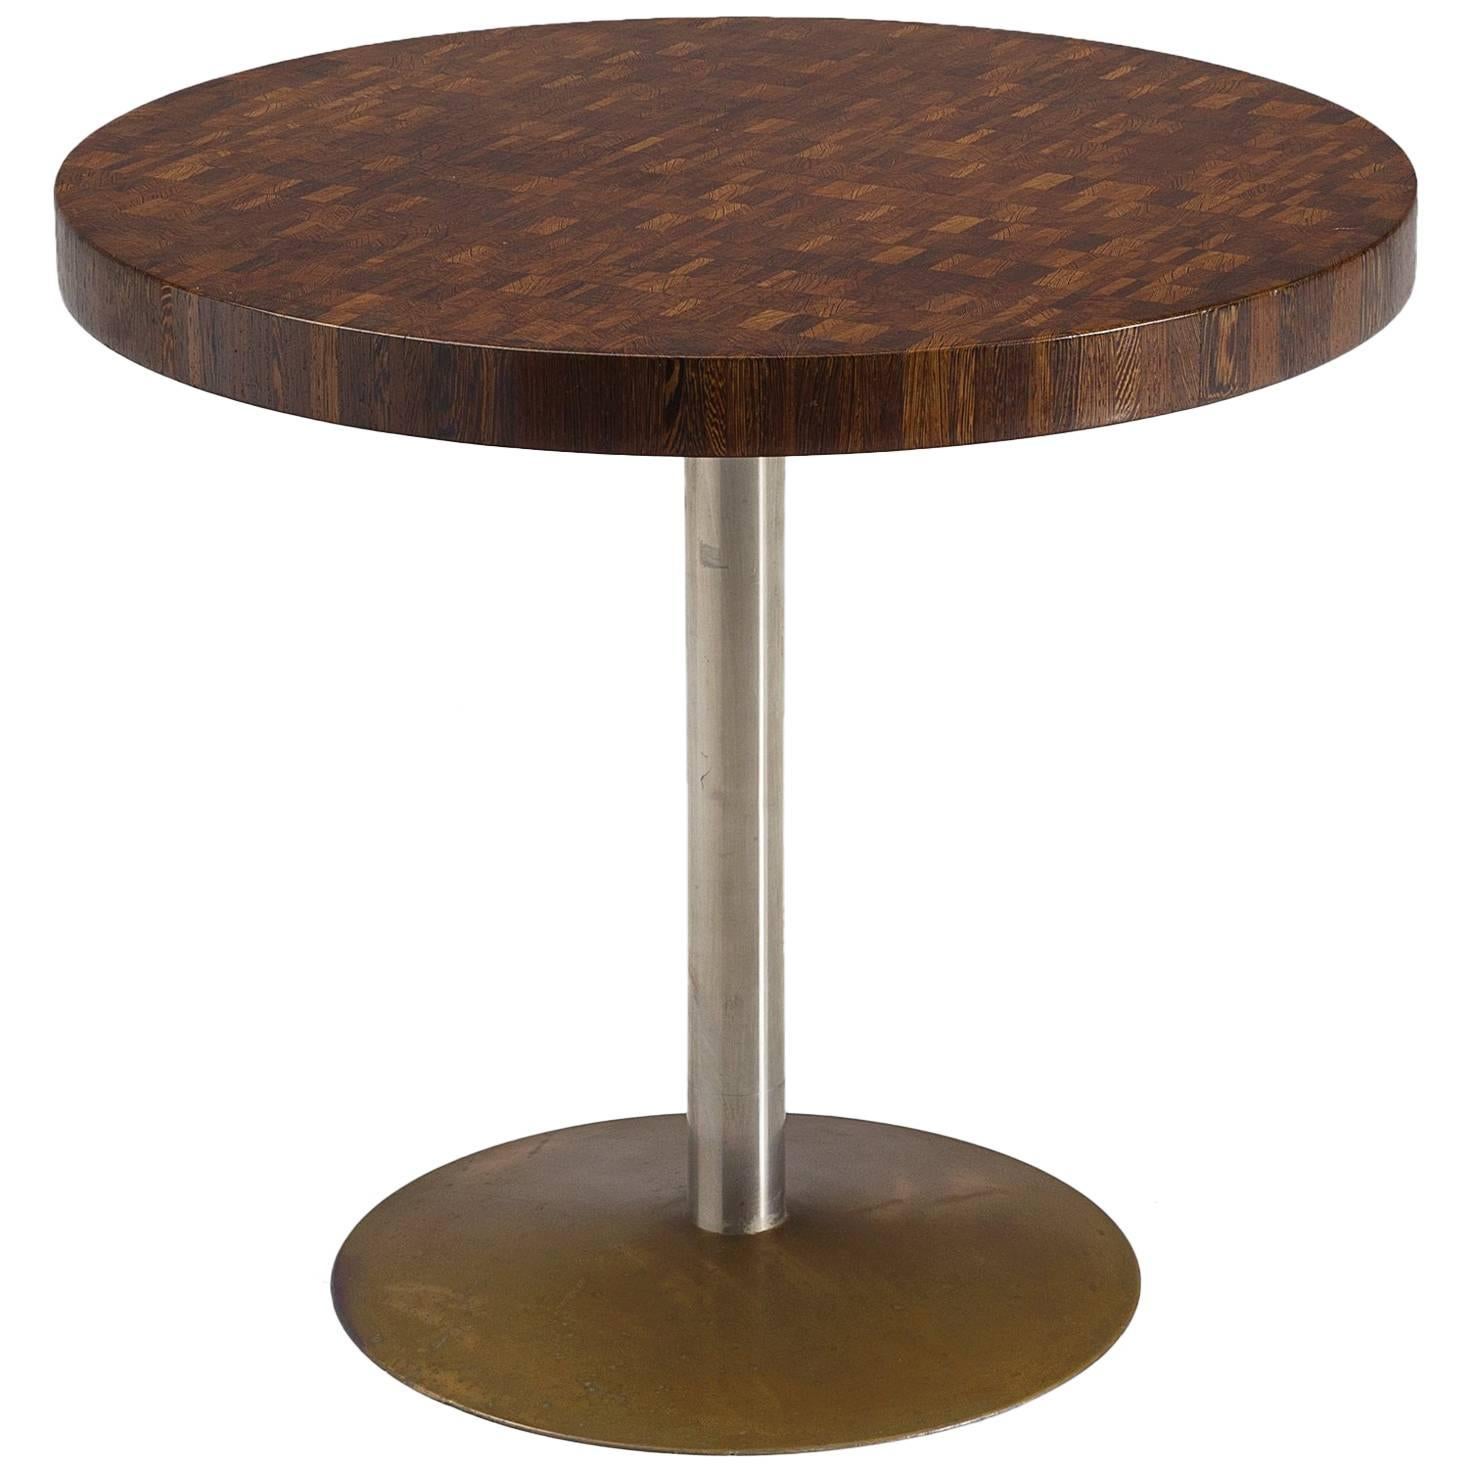 Jules Wabbes Exclusive Small Round Table in Wenge